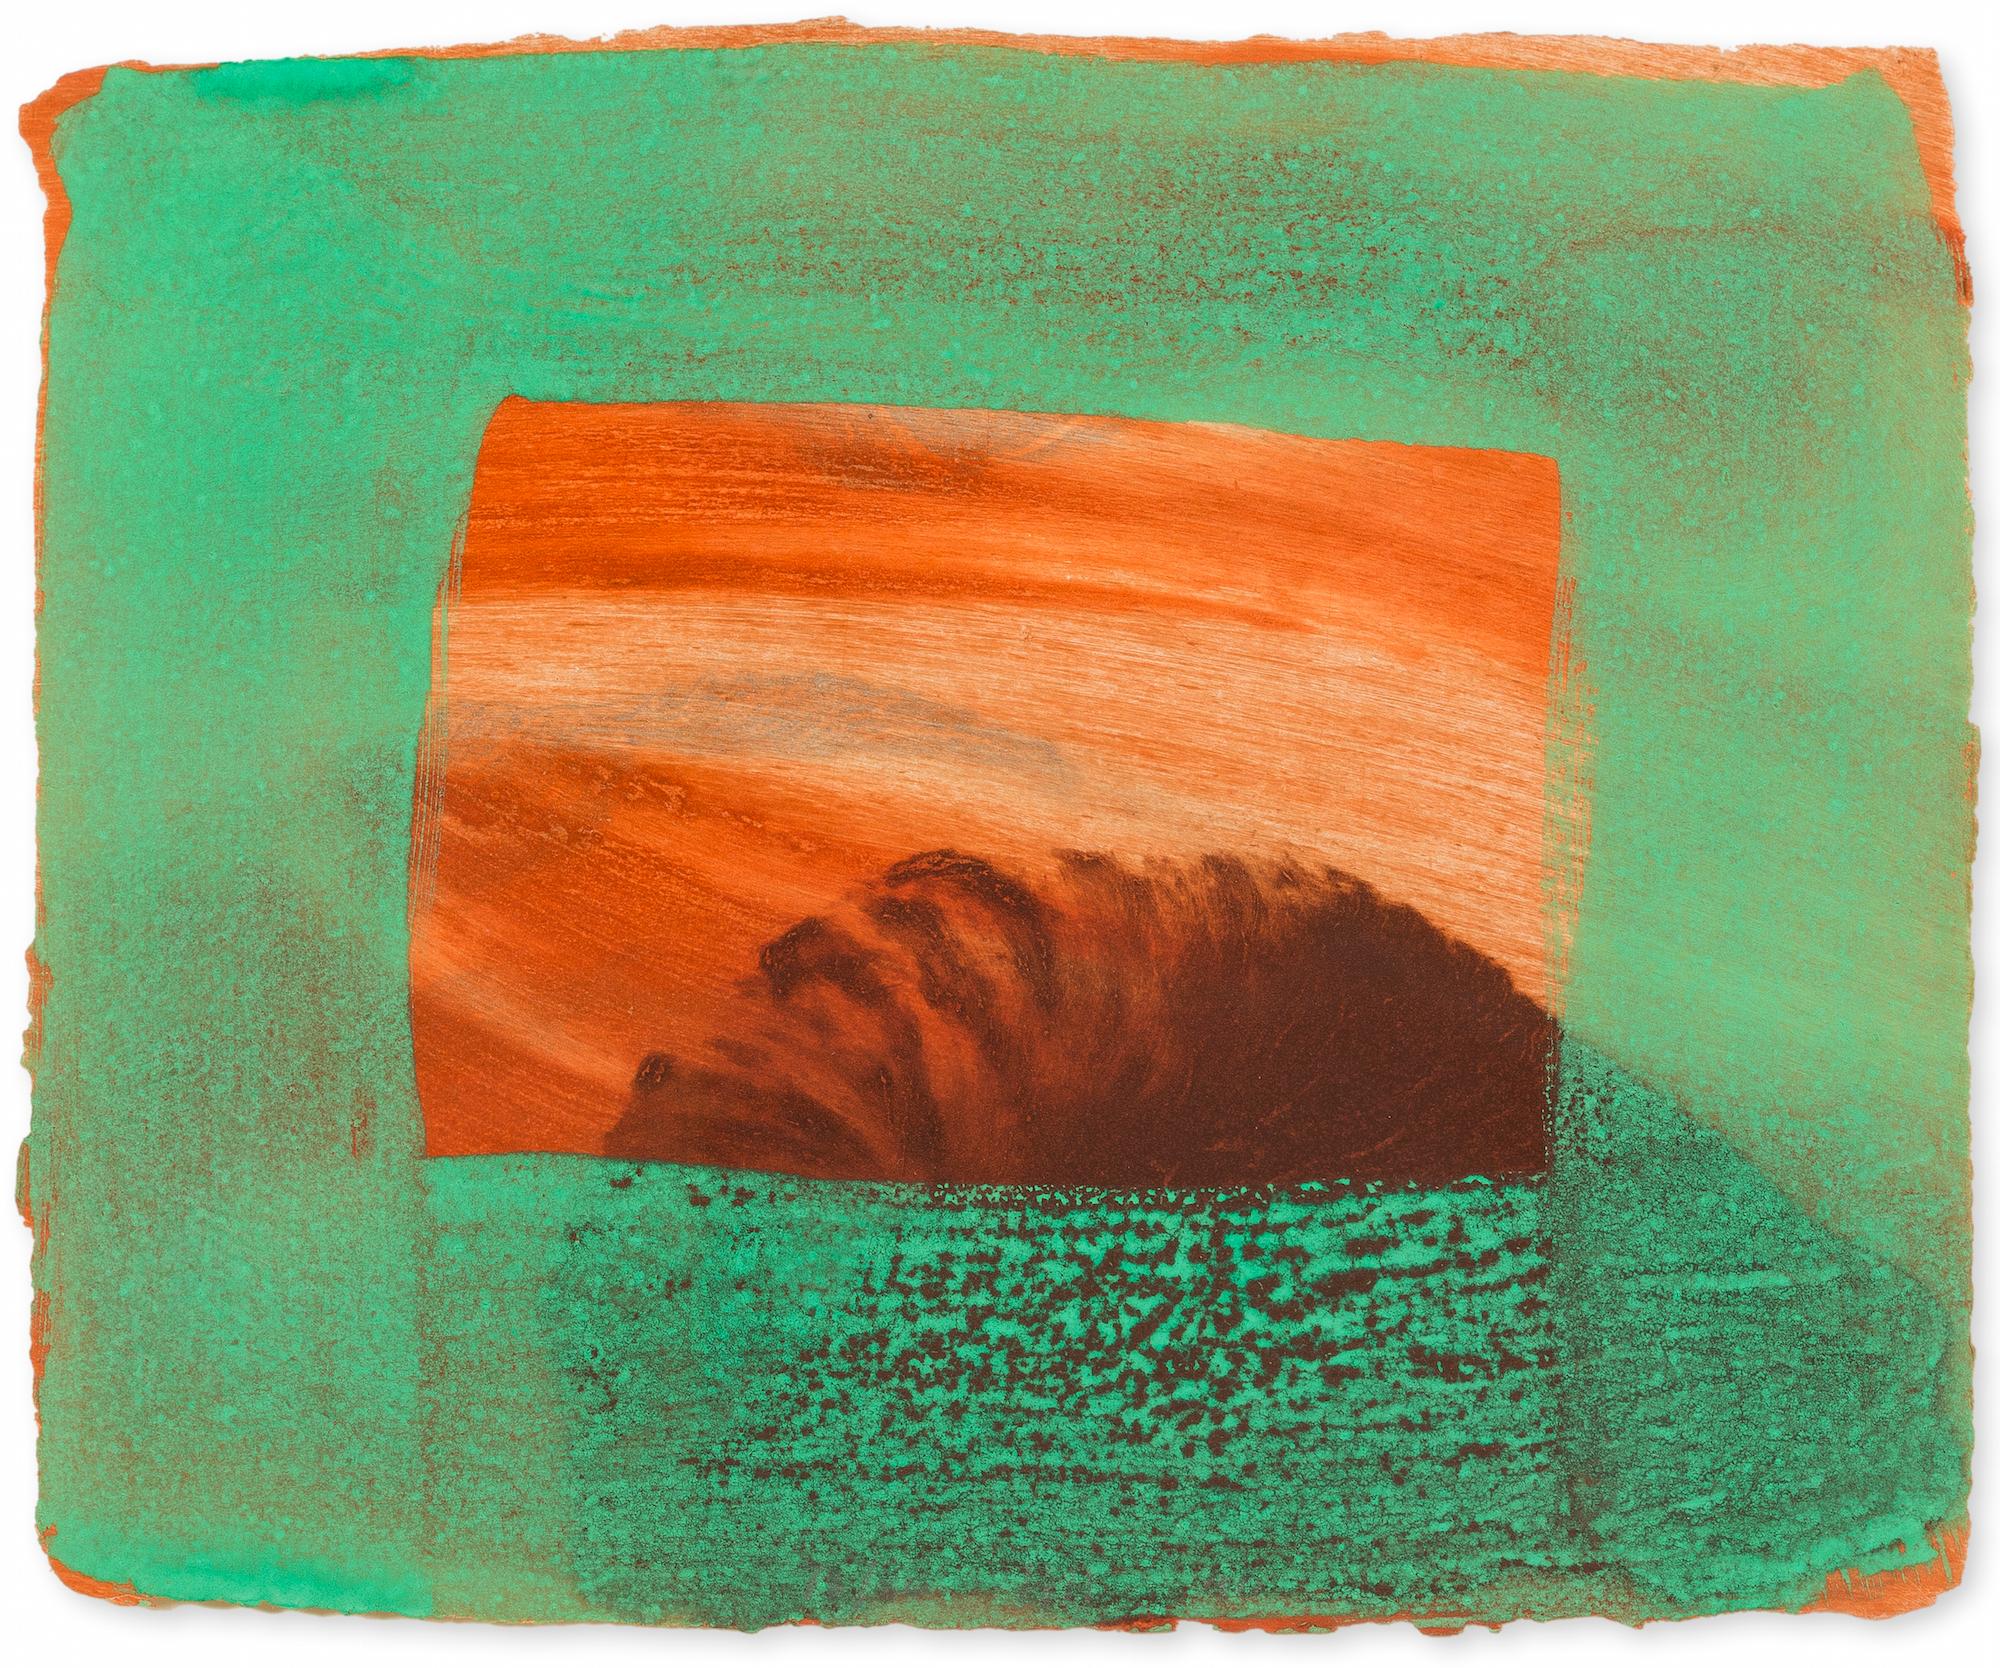 HOWARD HODGKIN
After Degas, 1990-91

Intaglio print with carborundum printed in red ochre, burnt Sienna, chrome yellow and raw umber and grey with handcolouring in veronese green egg tempera
On Aquarelle Larroque moulins de Larroque et Pombie